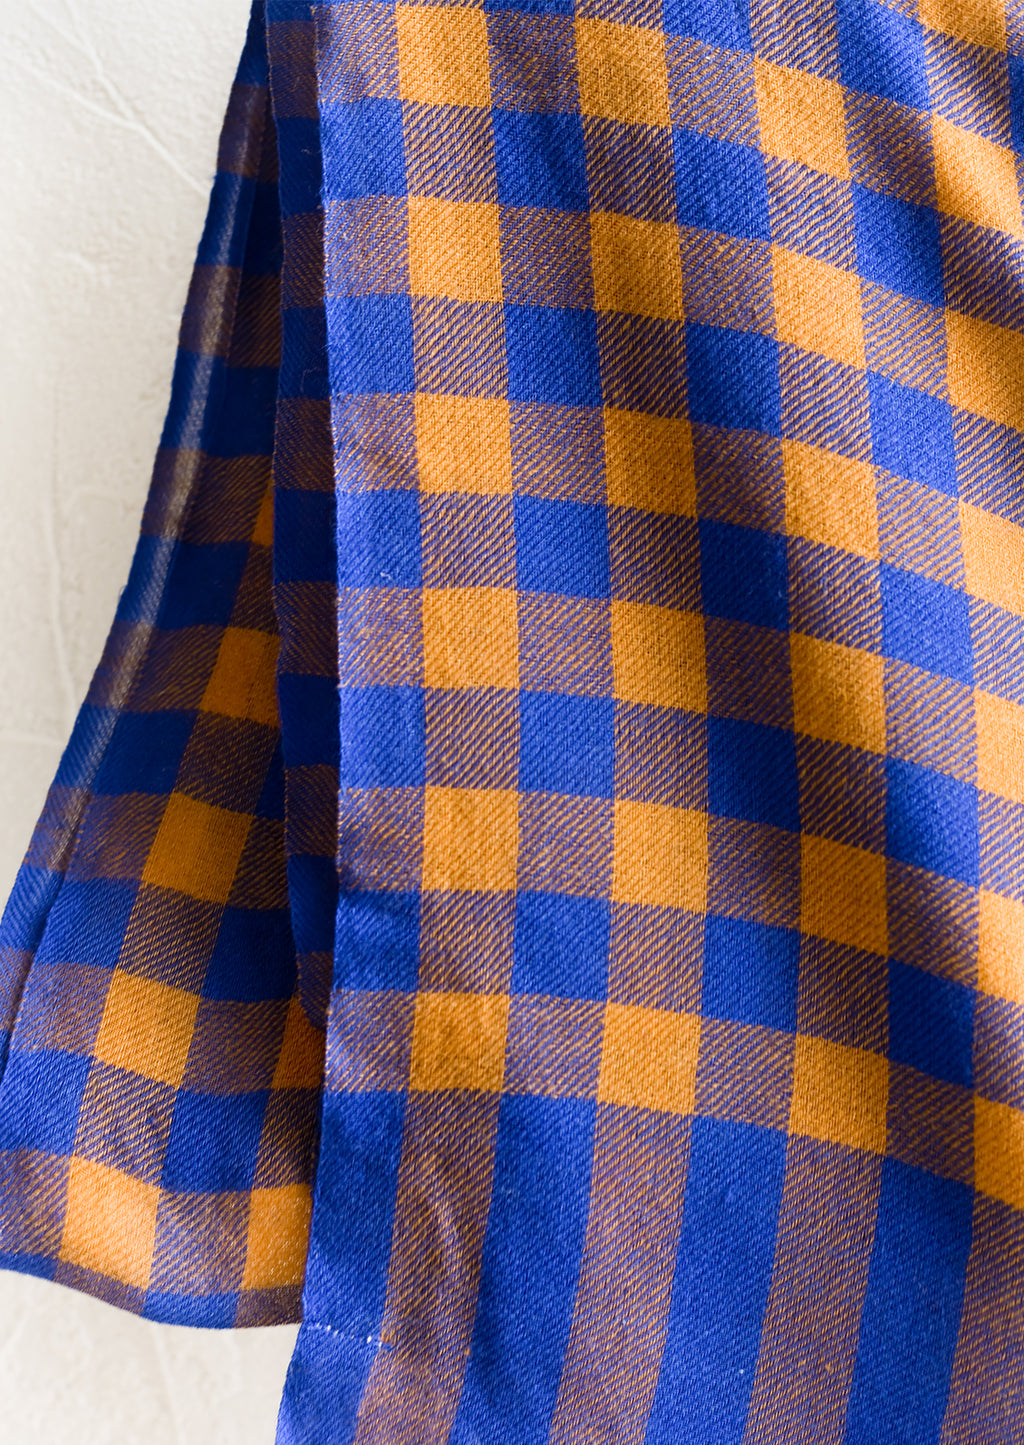 2: A lightweight woven wool scarf in blue and caramel gingham.